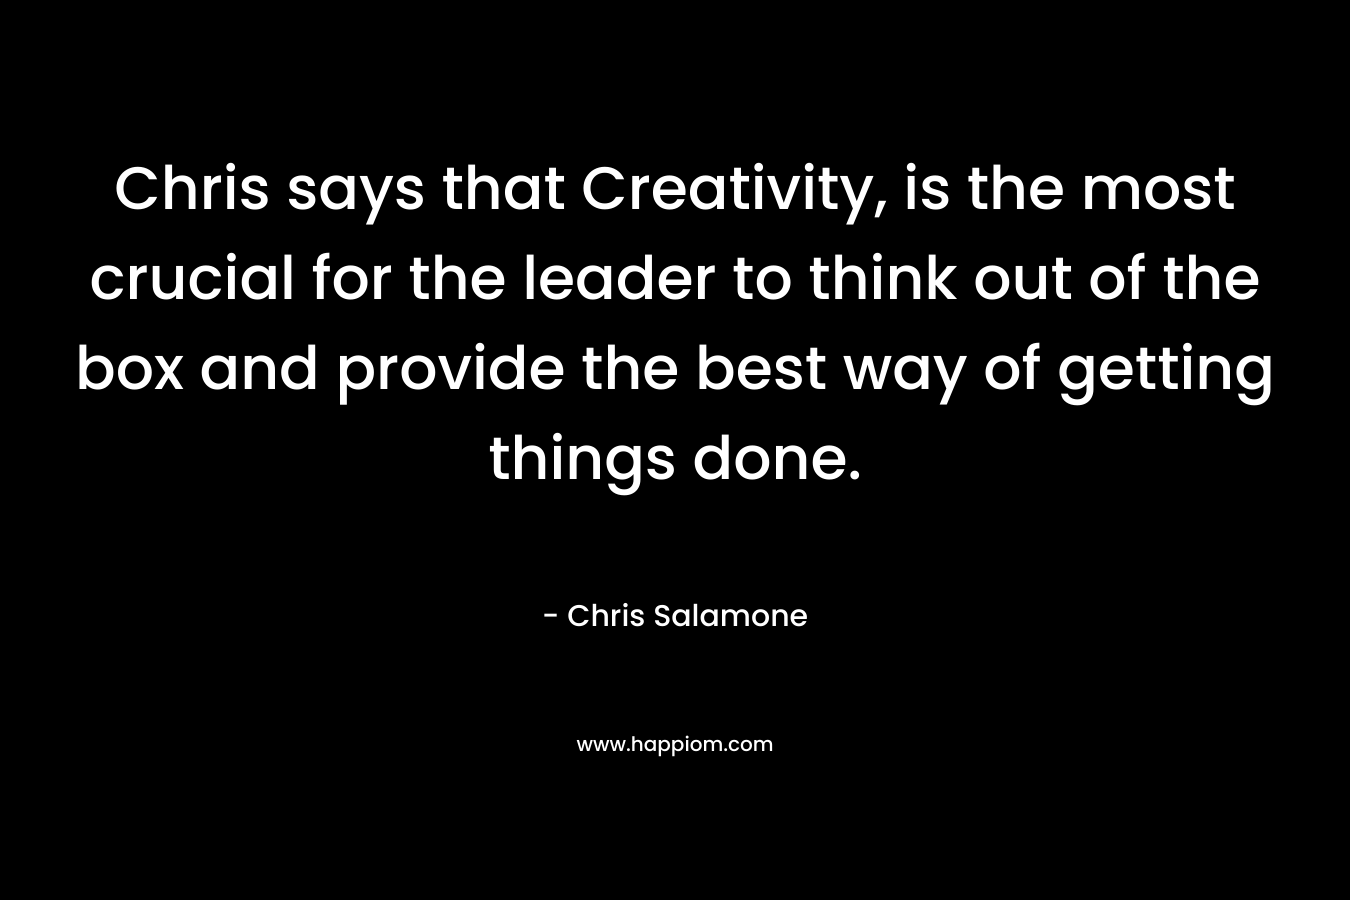 Chris says that Creativity, is the most crucial for the leader to think out of the box and provide the best way of getting things done. – Chris Salamone